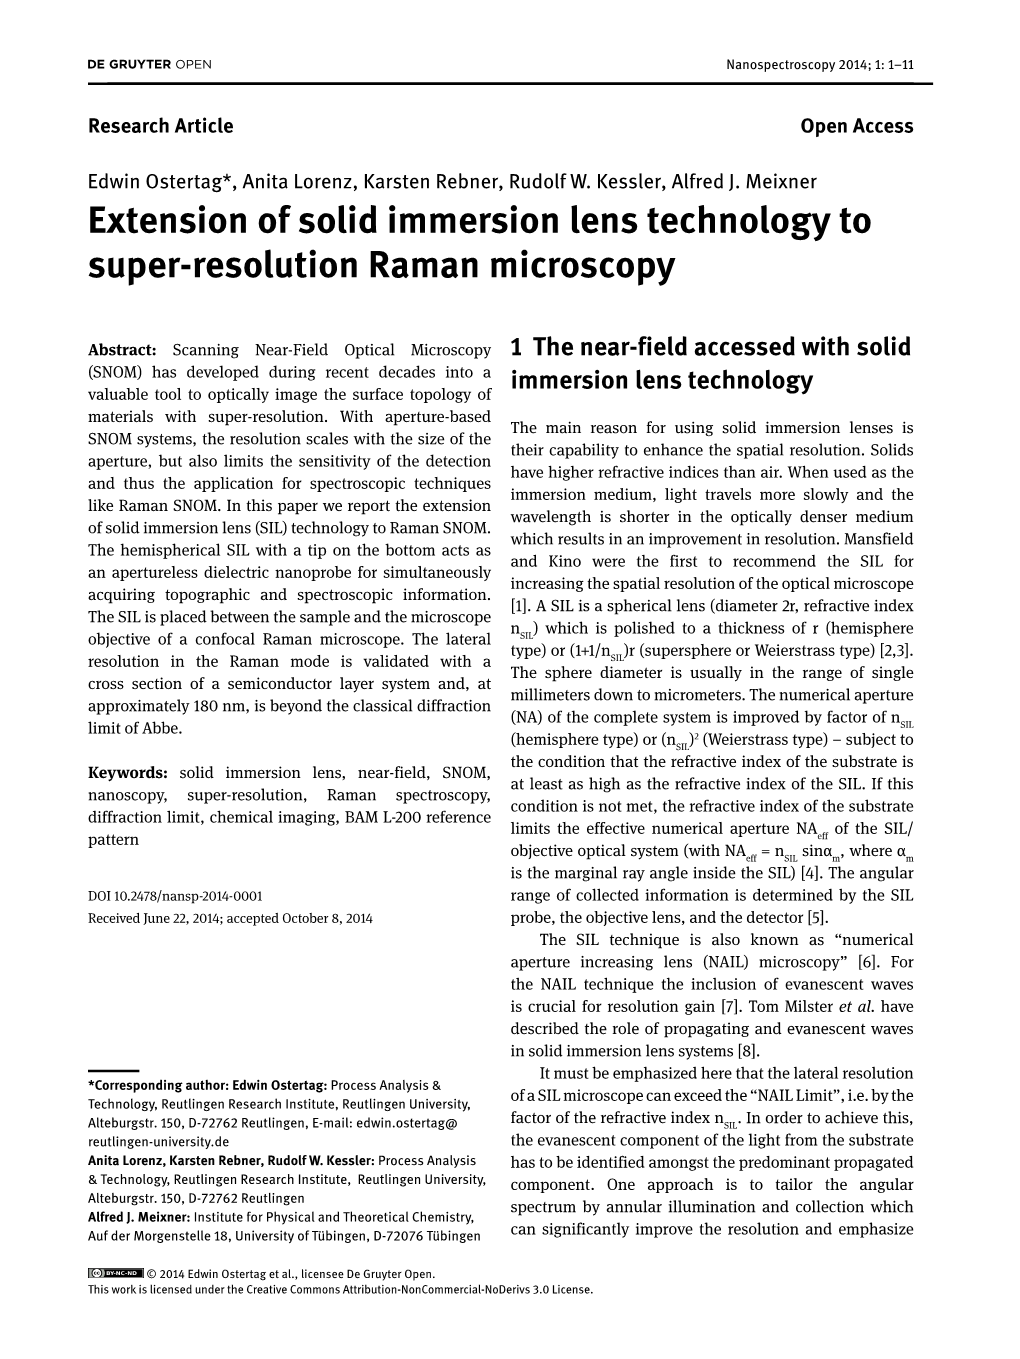 Extension of Solid Immersion Lens Technology to Super-Resolution Raman Microscopy